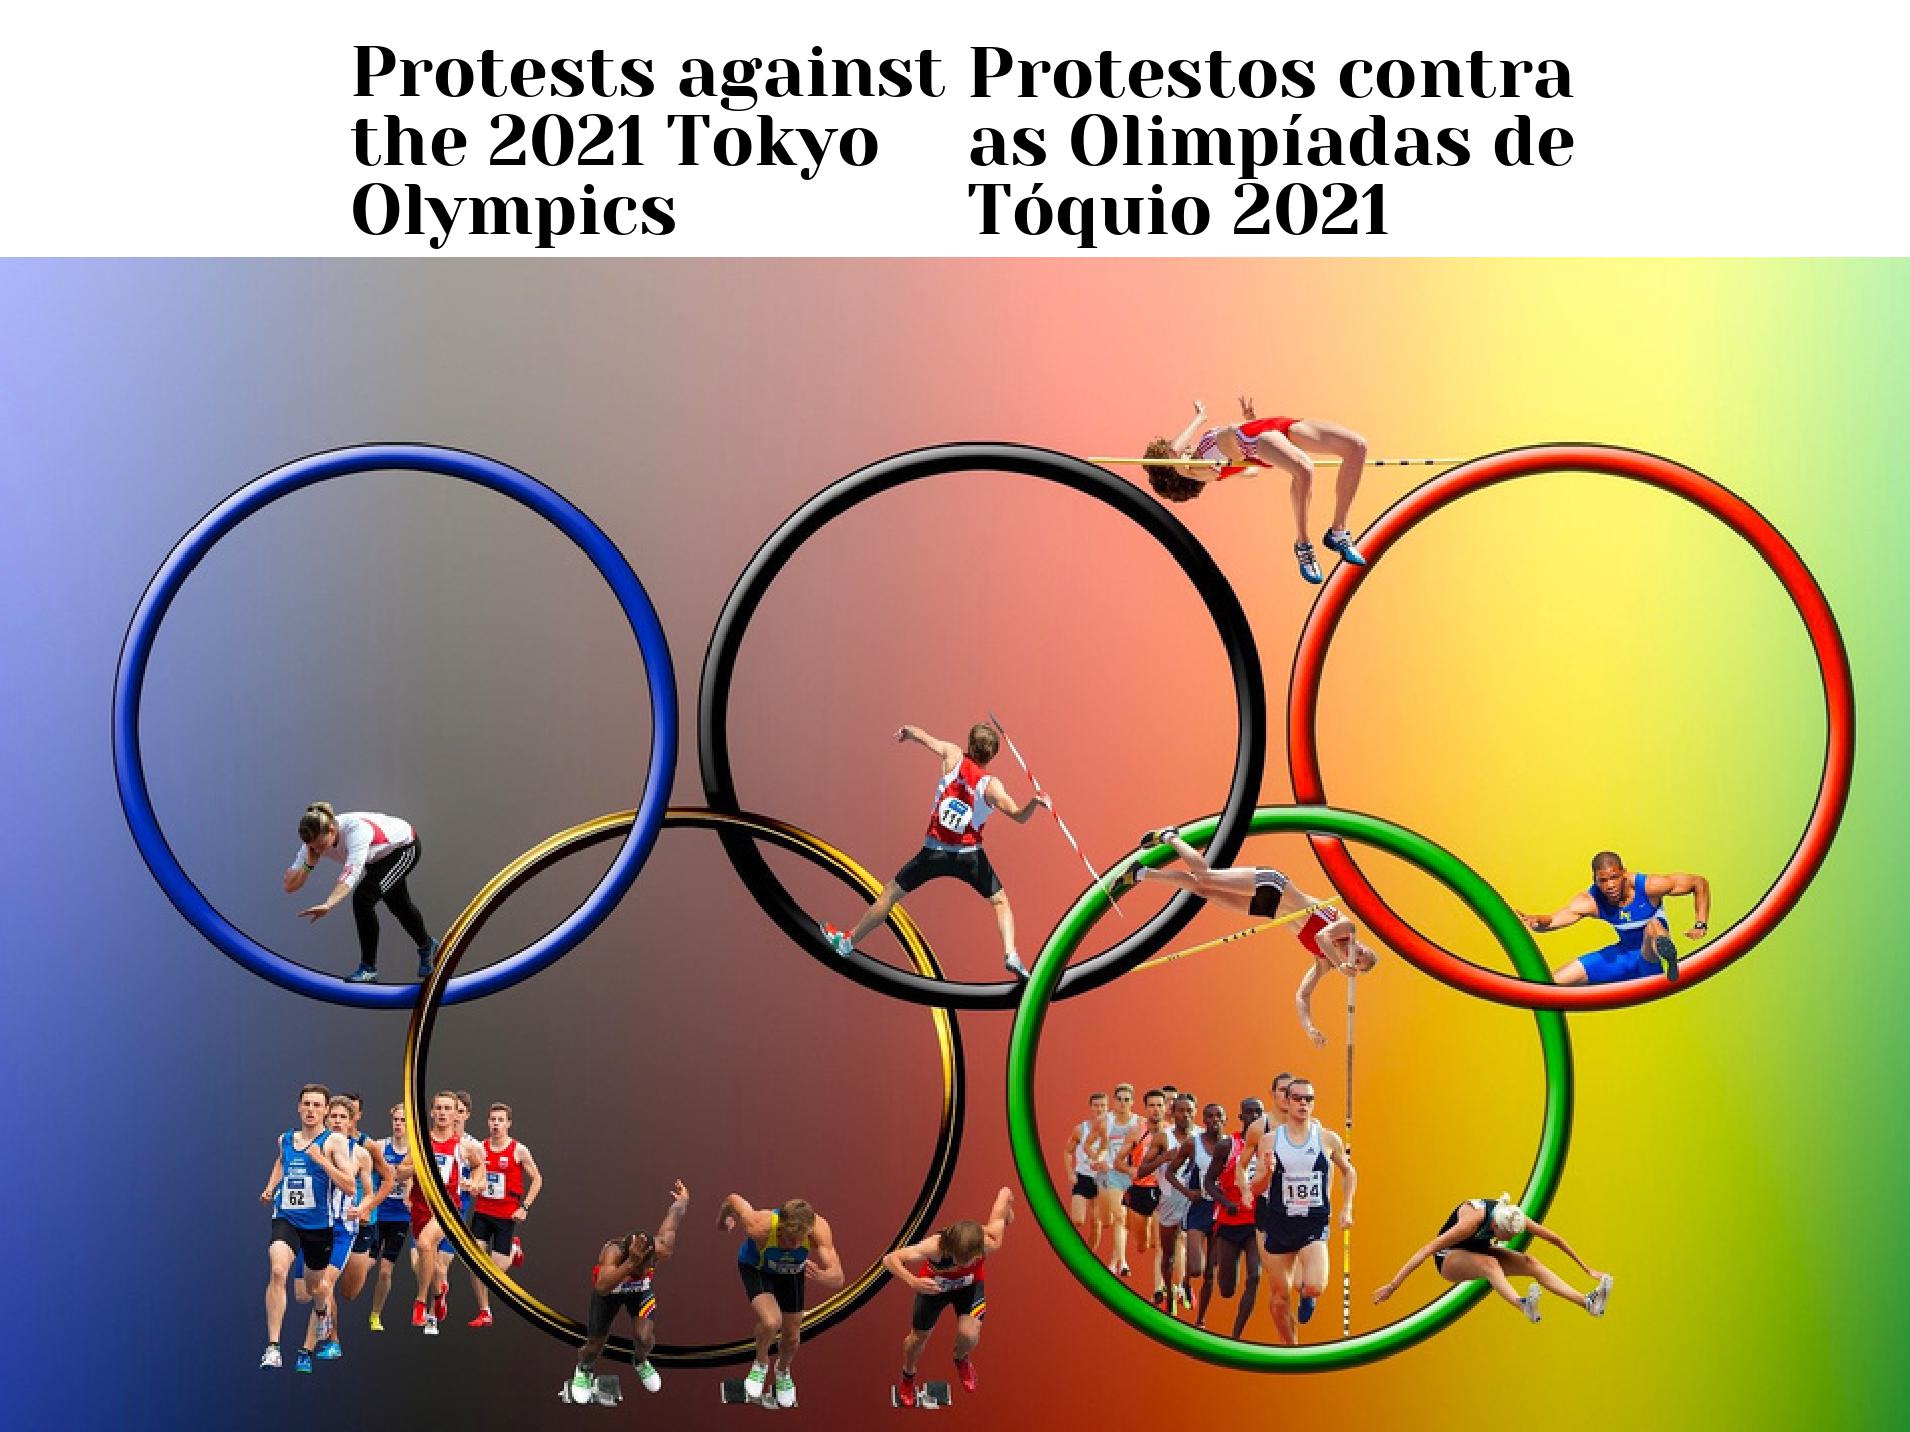 Protests against the 2021 Tokyo Olympics